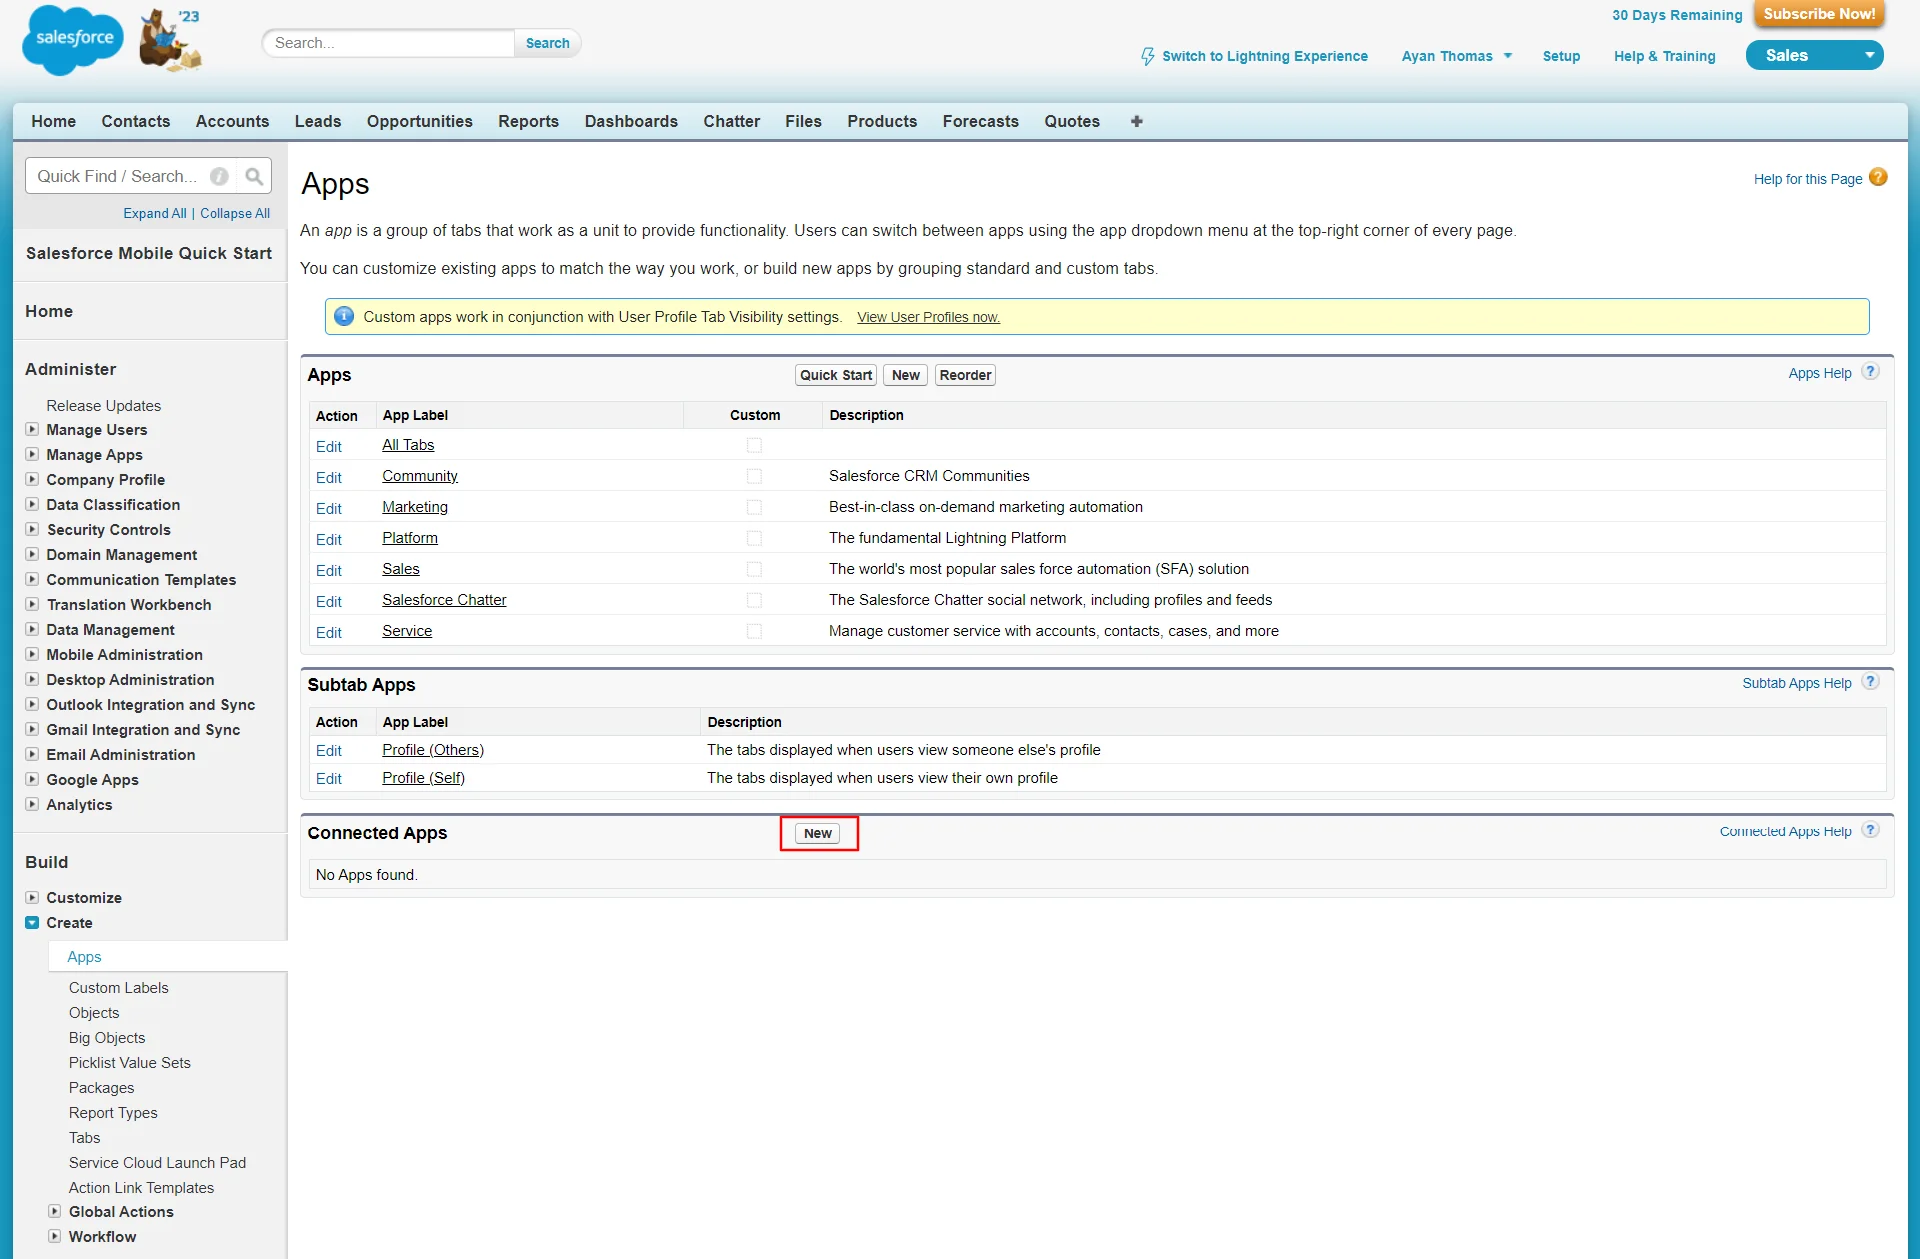 Salesforce SSO - click on New button to create new application